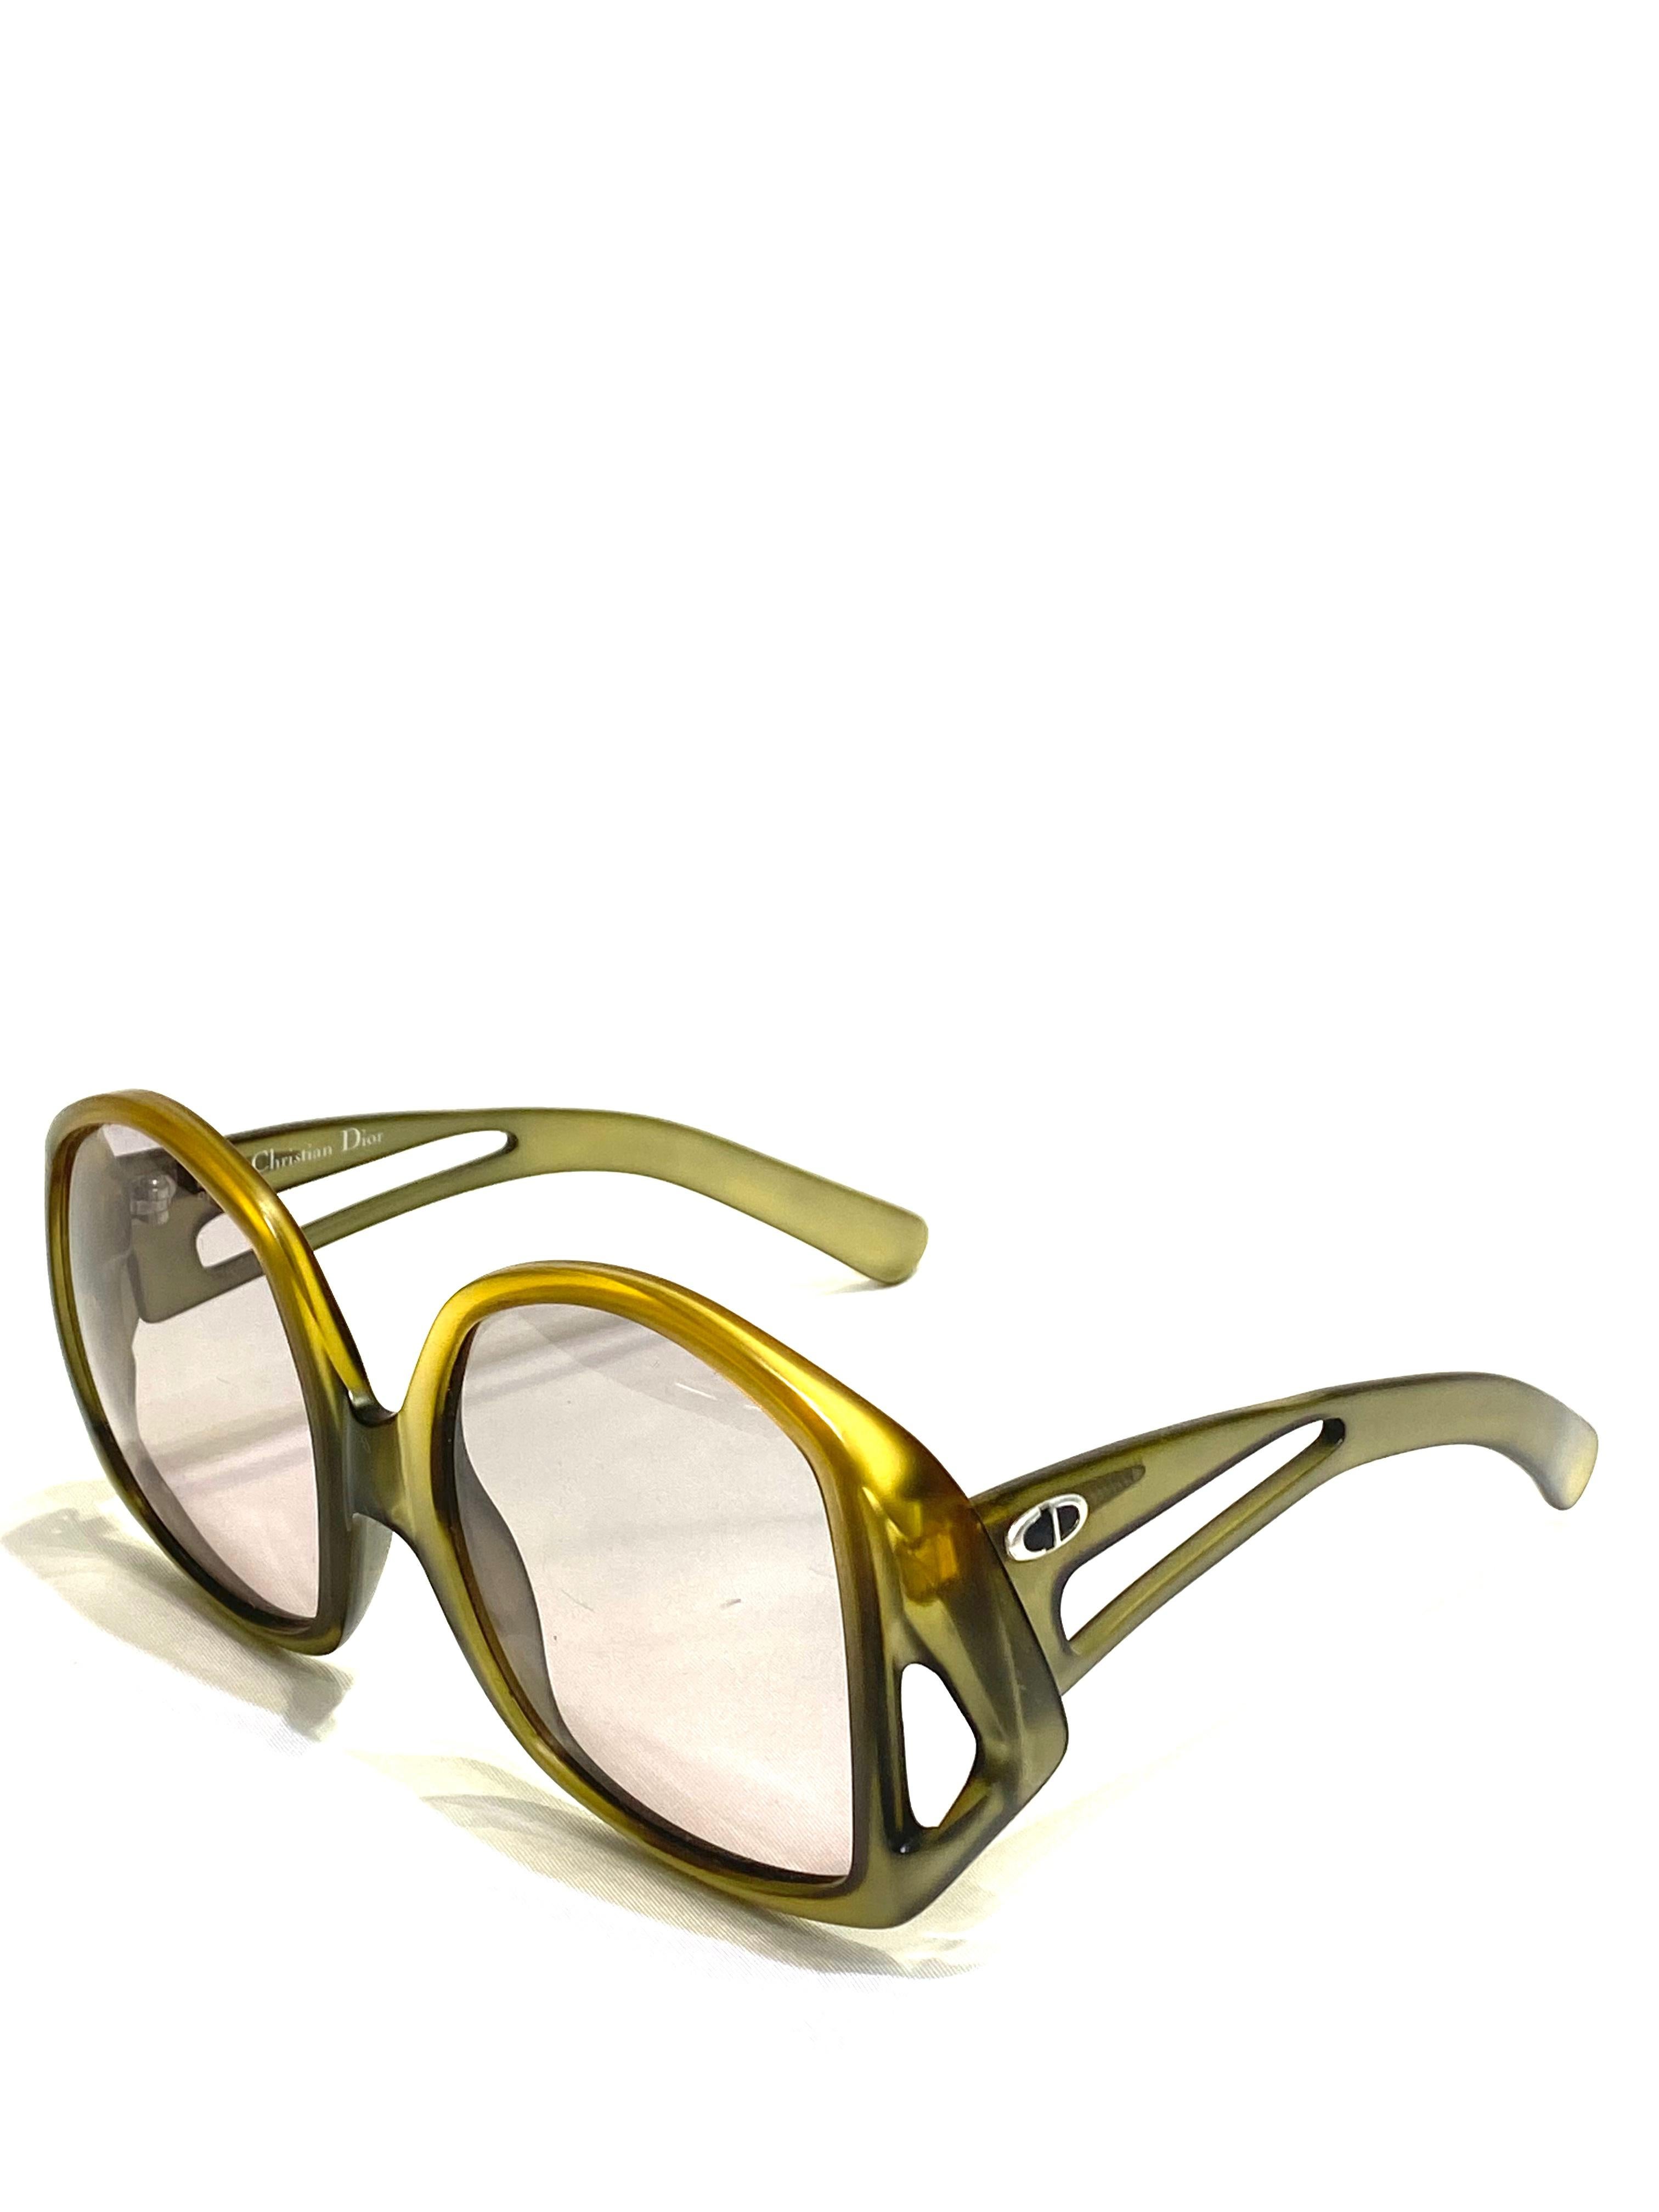 Product details:

Circa 1970.
Featuring yellow/ green matte finish frames with round square lens, silver tone CD logo on each sides of the temple.
Signed Christian Dior.
Made in Germany.
